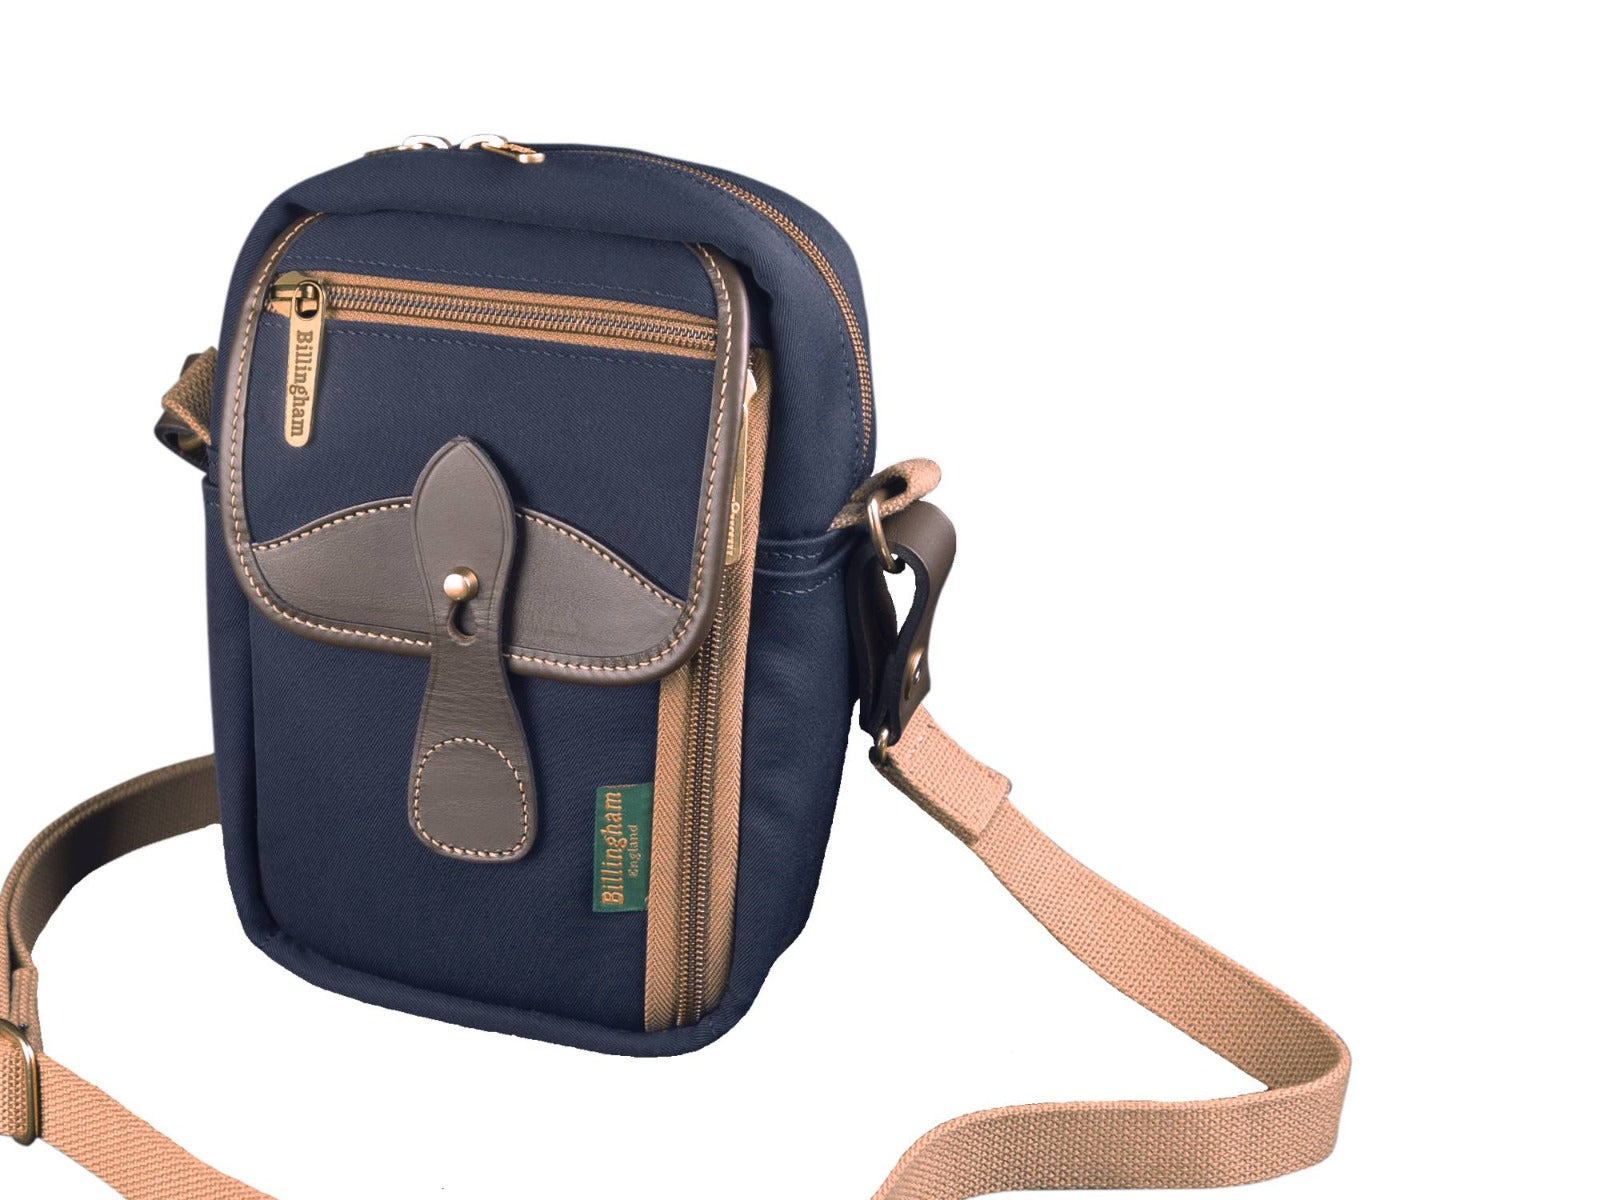 Product Image of Billingham Airline Stowaway Camera Case - Navy / Chocolate